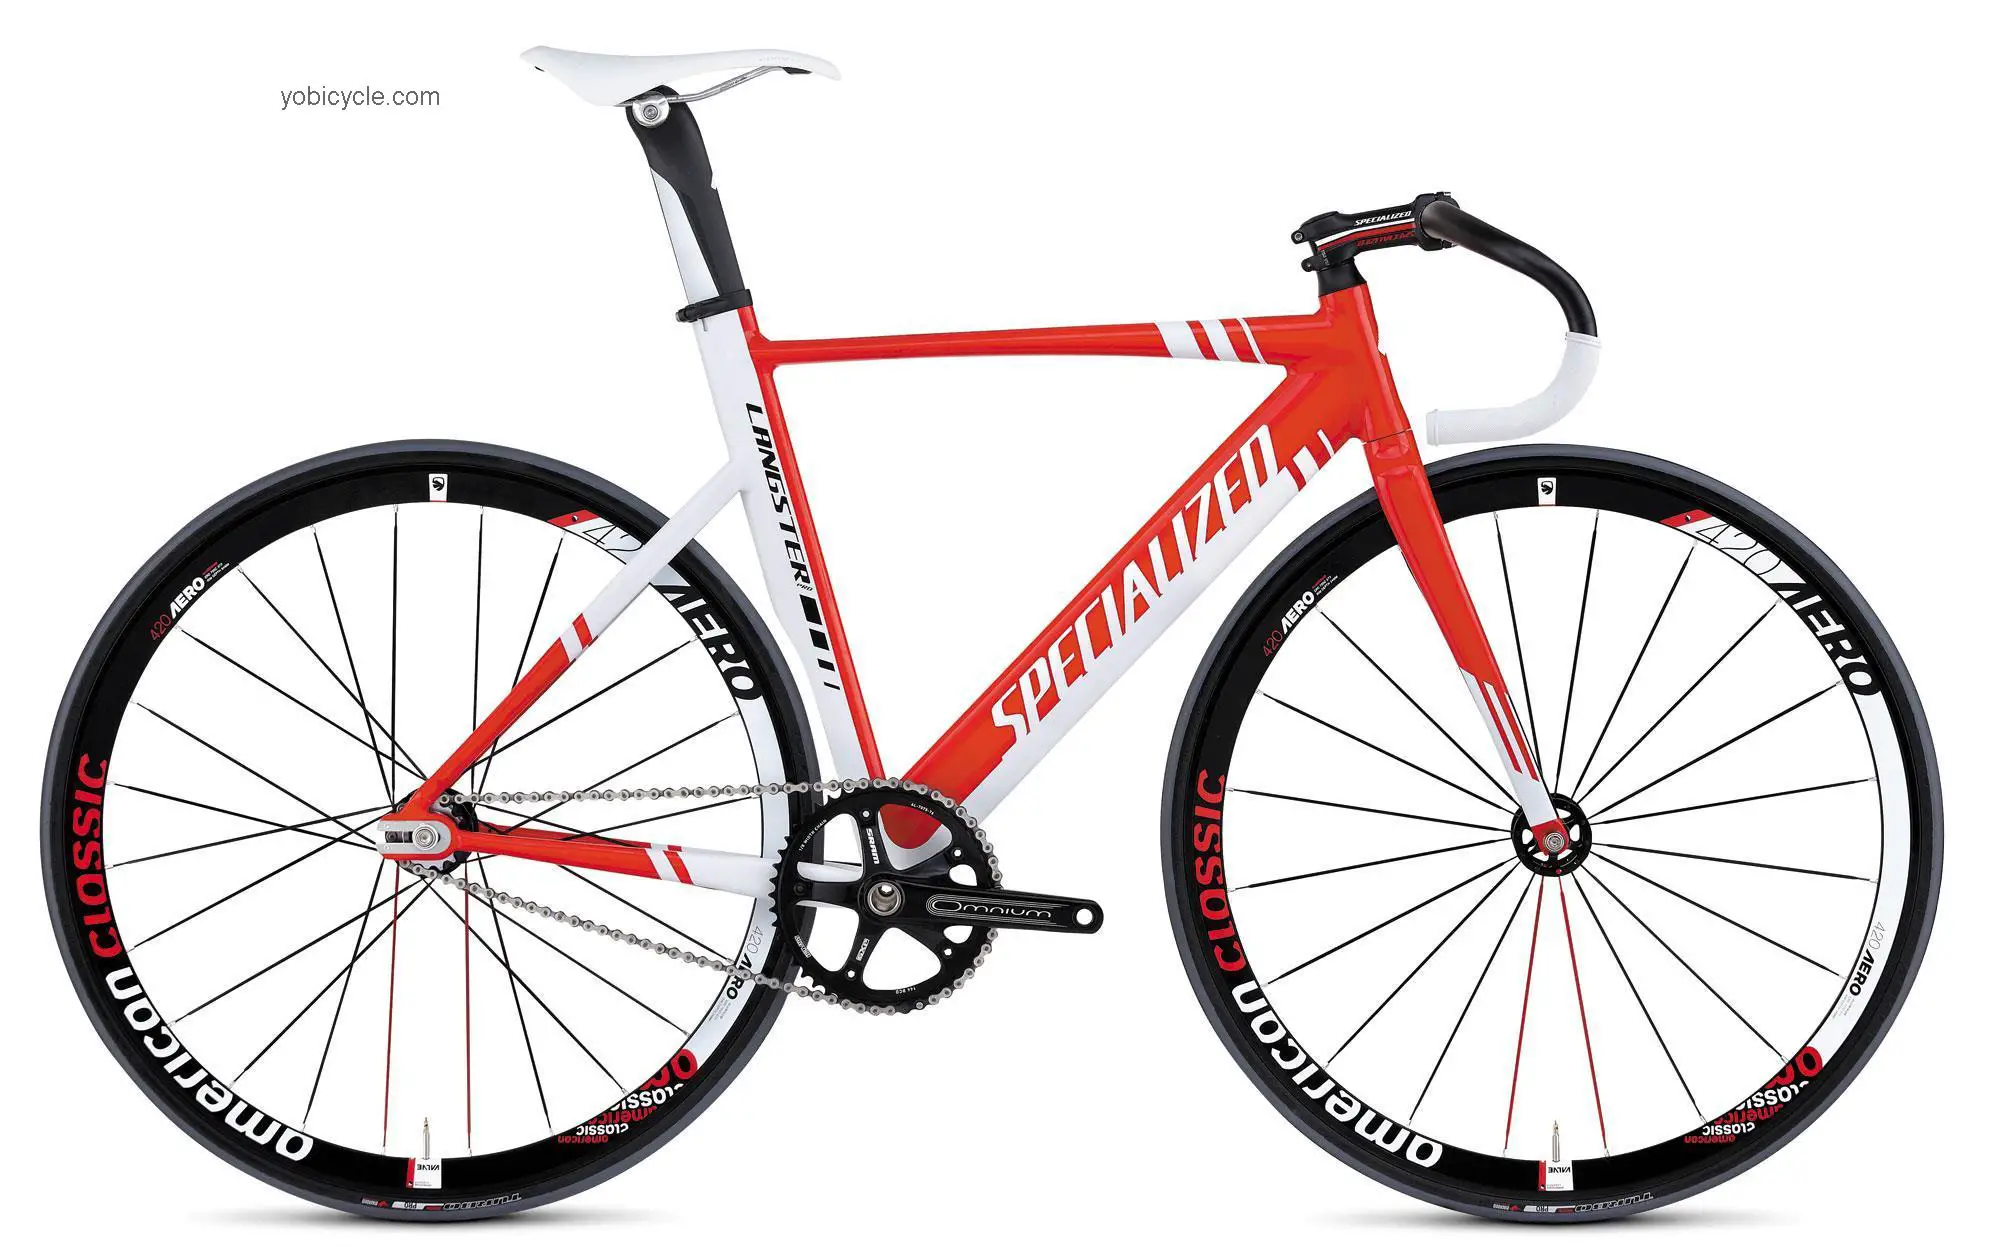 Specialized Langster Pro 2012 comparison online with competitors